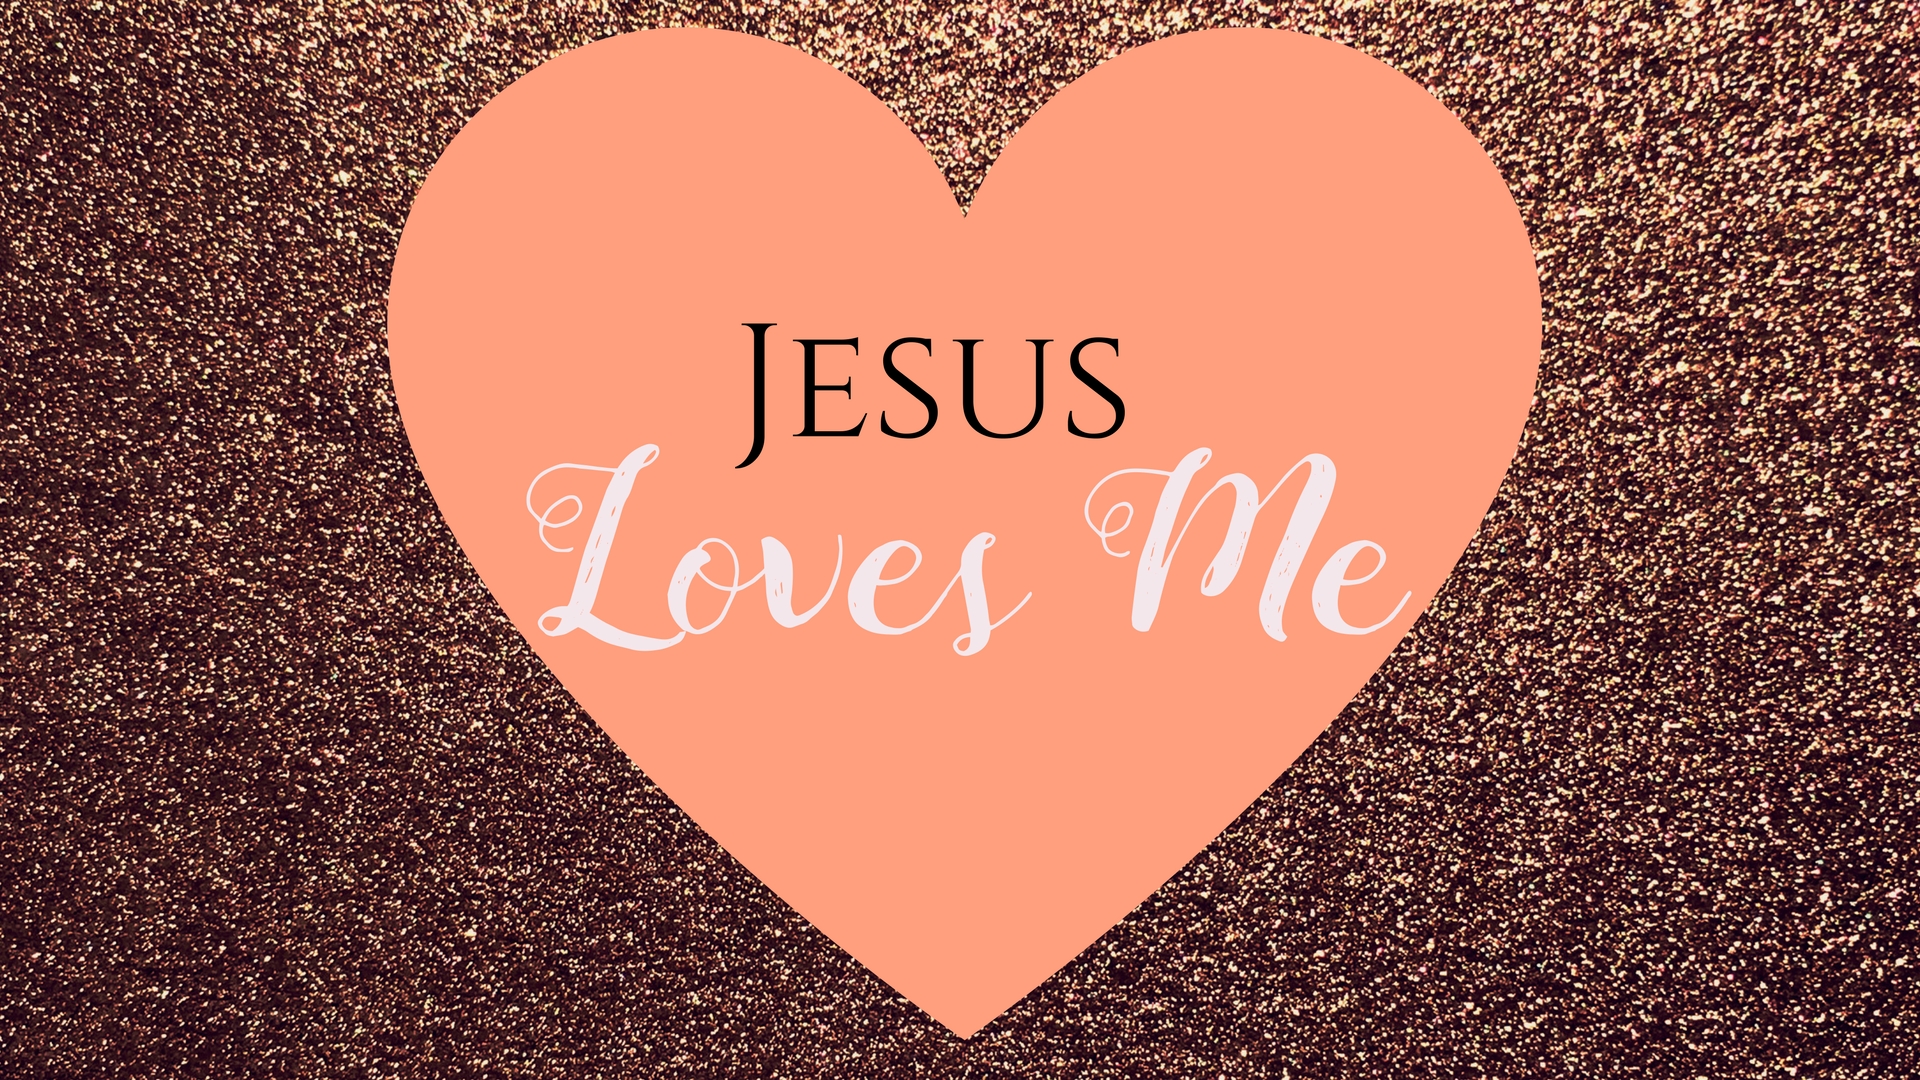 Jsus Loves You Christian Wallpaper Photo And Screensaver For